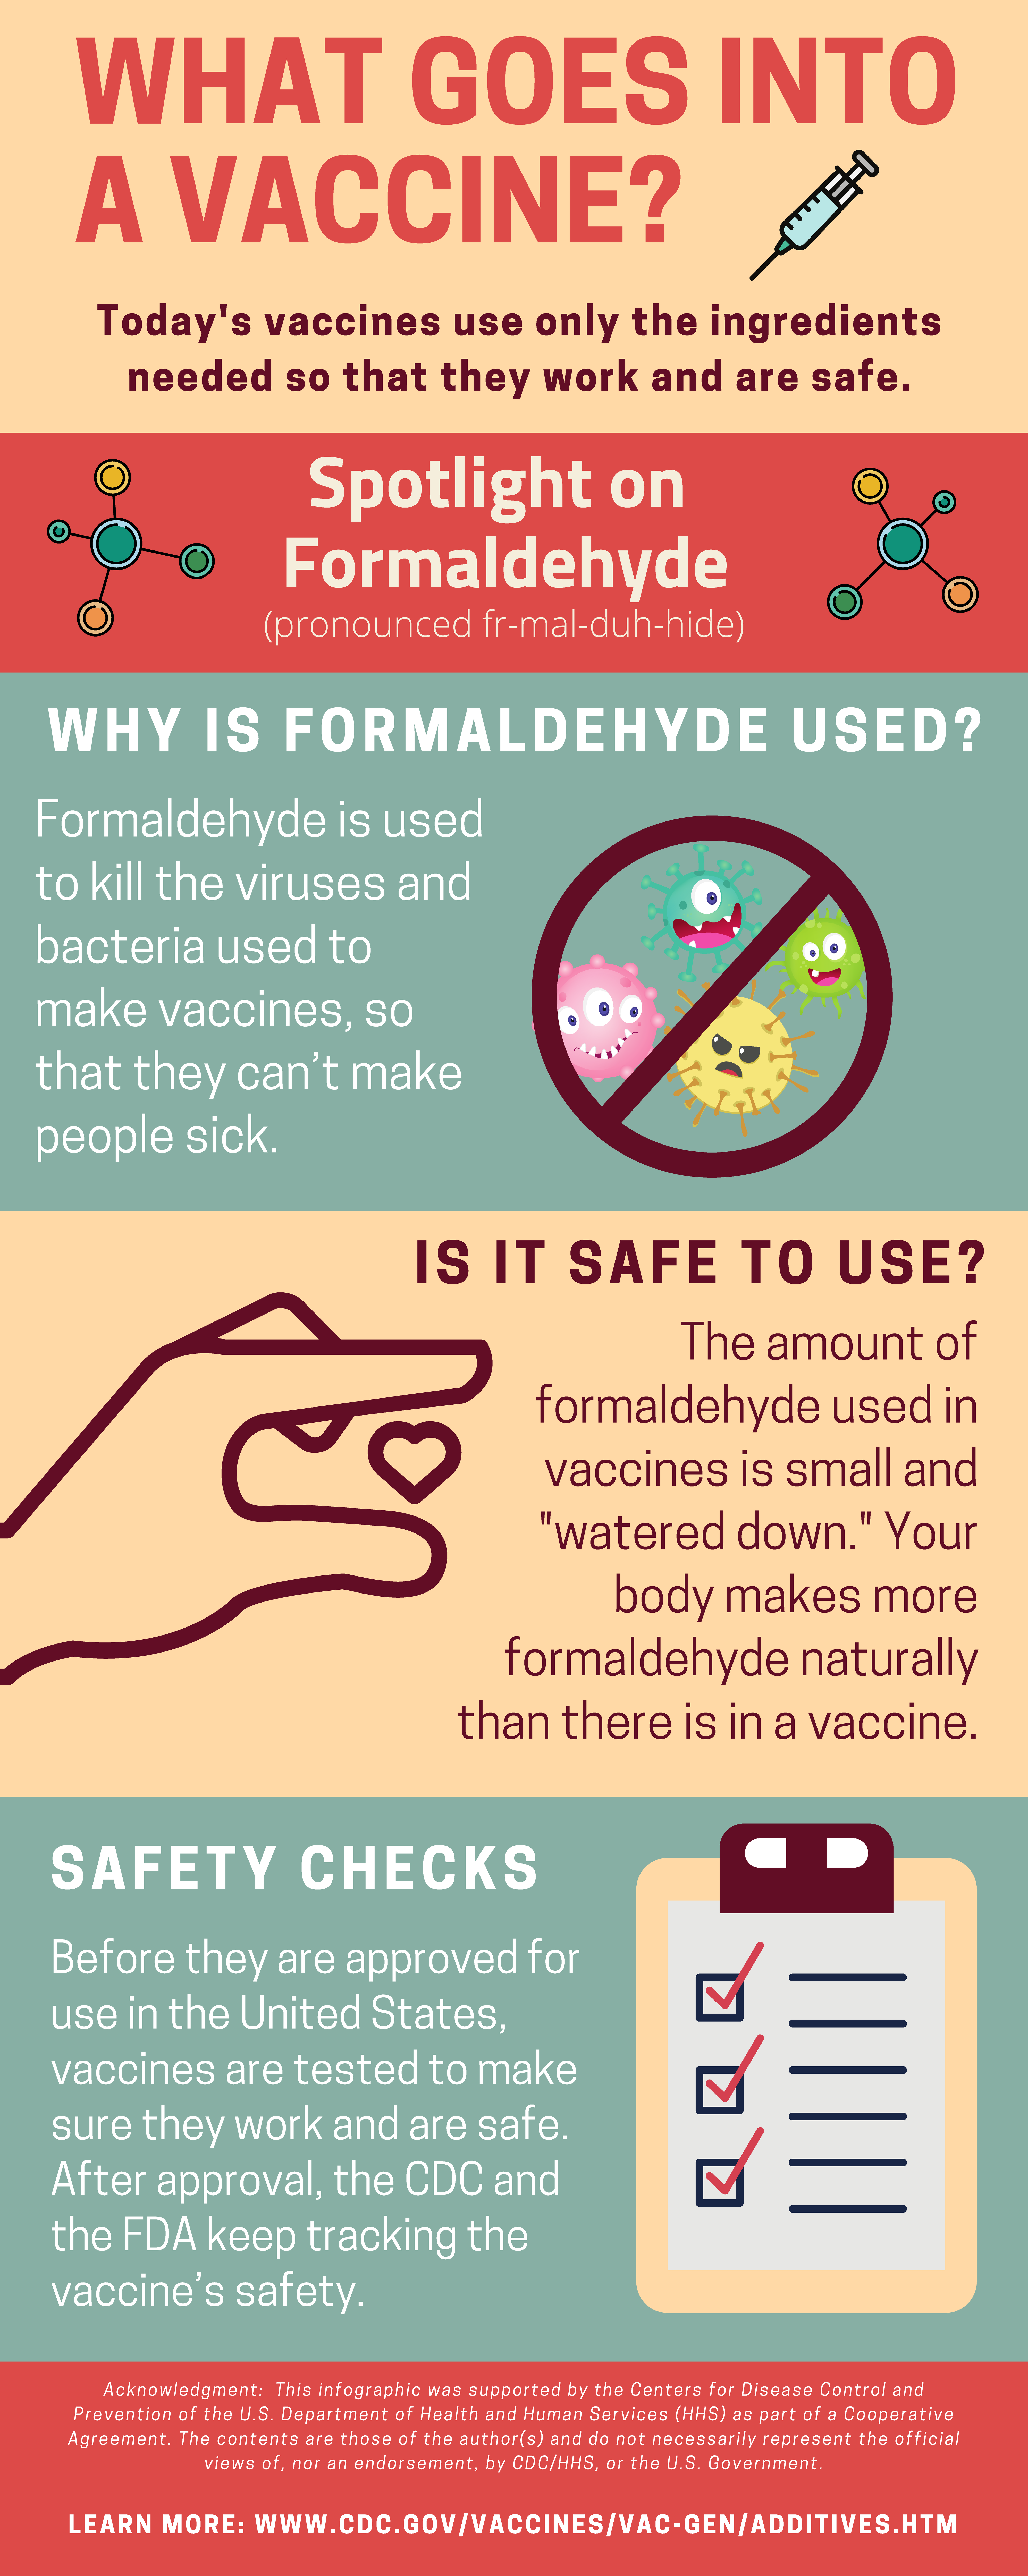 Infographic: What Goes Into a Vaccine? Formaldehyde Spotlight. Today's vaccines use only the ingredients needed so they work and are safe. Spotlight on Formaldehyde: pronounced fr-mal-duh-hide  Why is Formaldehyde Used? Formaldehyde is used to kill the viruses and bacteria used to make vaccines, so that they can’t make people sick.  Is it safe to use? The amount of formaldehyde used in vaccines is small and “watered down.” Your body makes more formaldehyde naturally than there is in a vaccine.  Safety Check